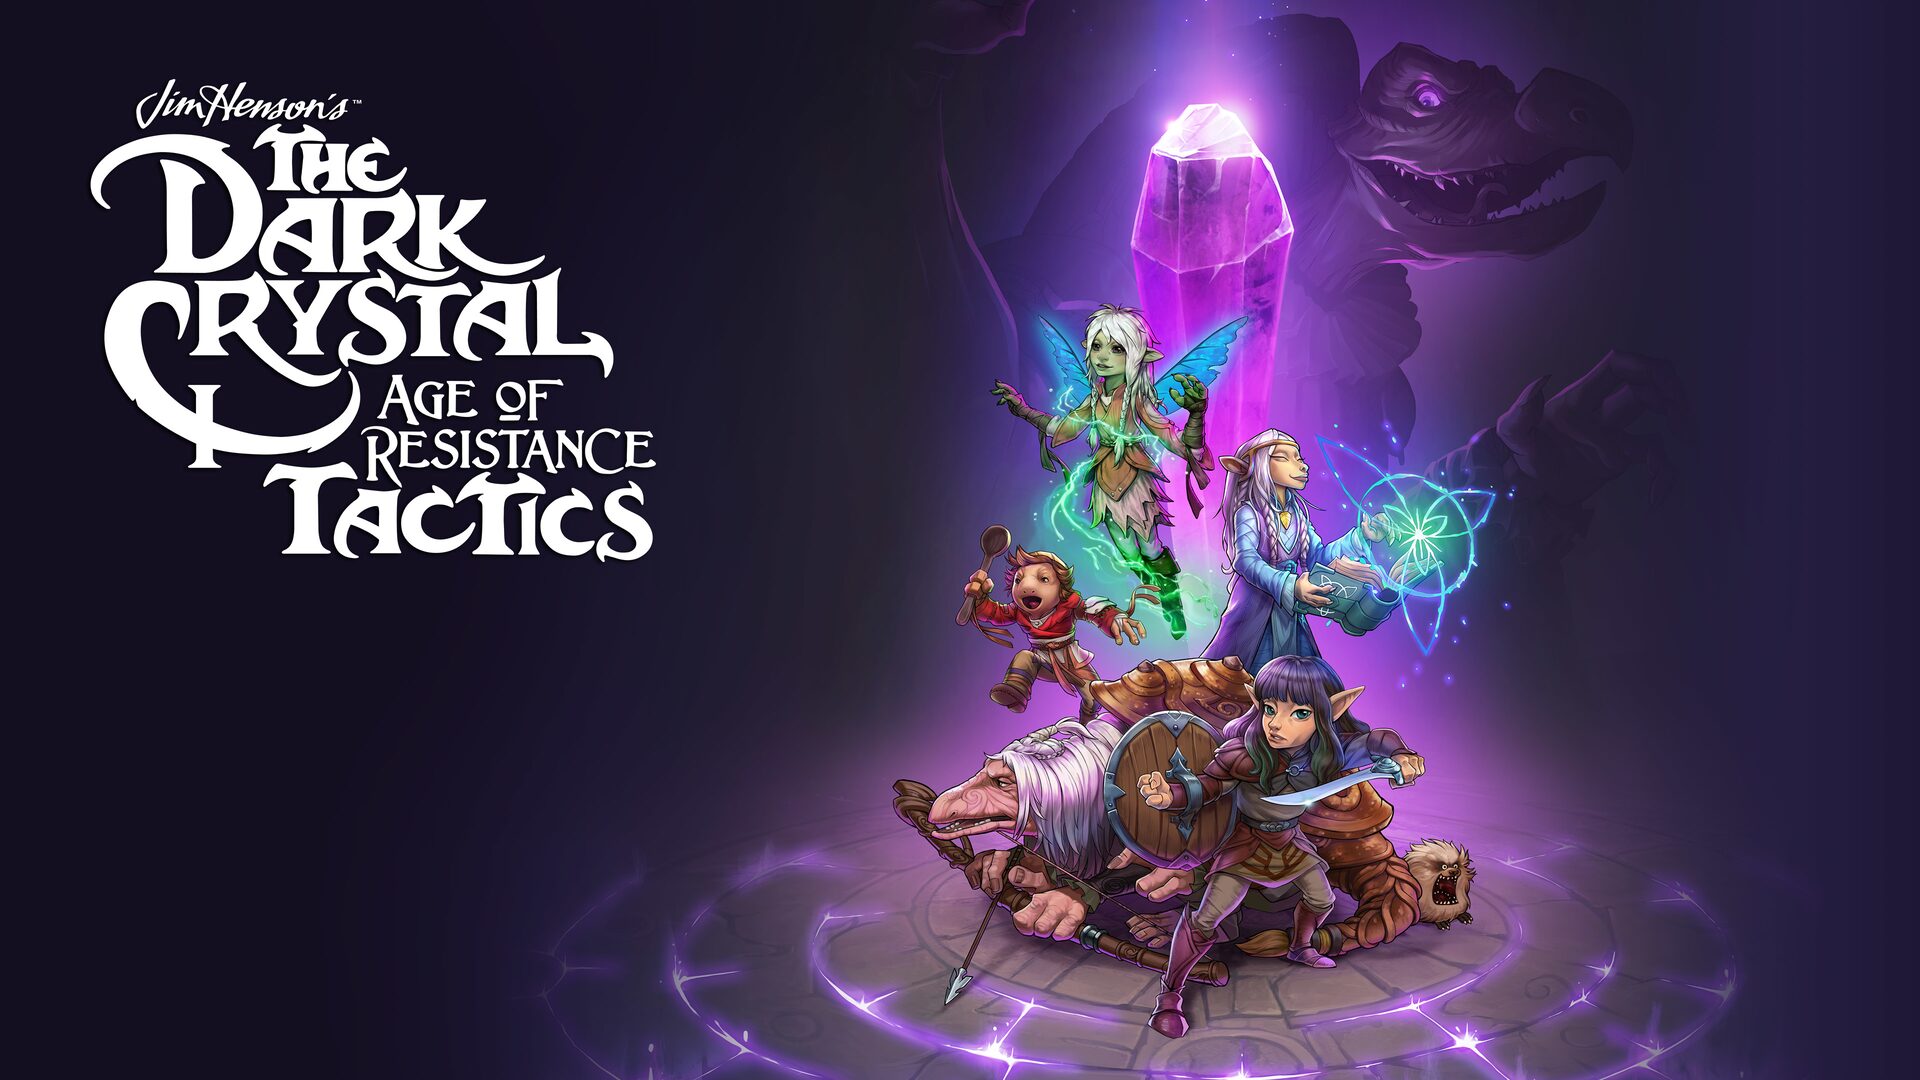 The Dark Crystal: Age of Resistance Tactics (Simplified Chinese, English, Korean, Japanese)